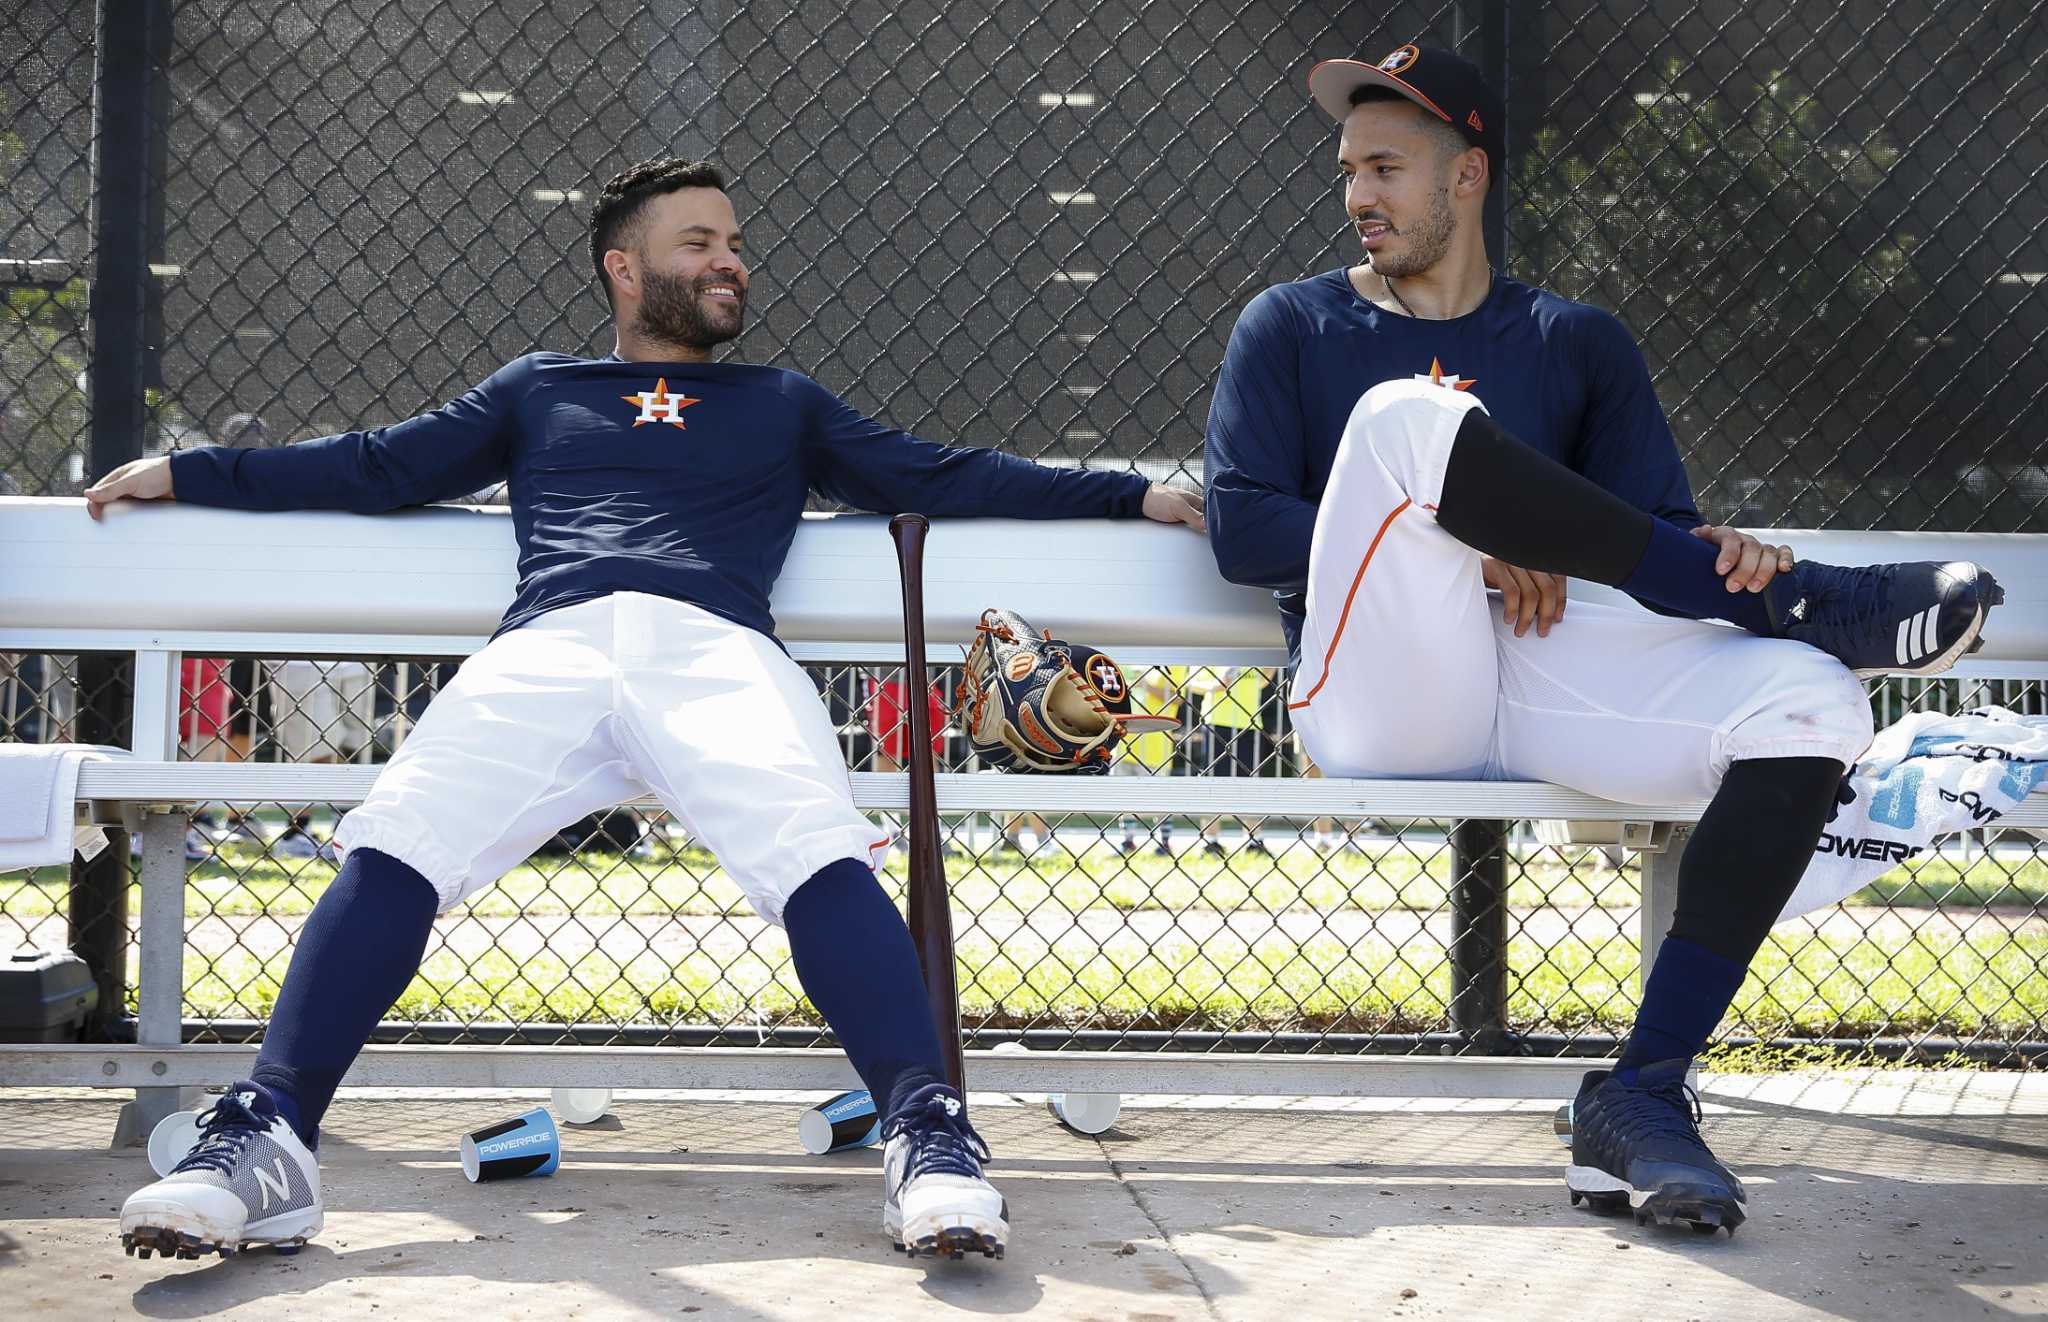 Eat like Astros José Altuve and Carlos Correa with these healthy